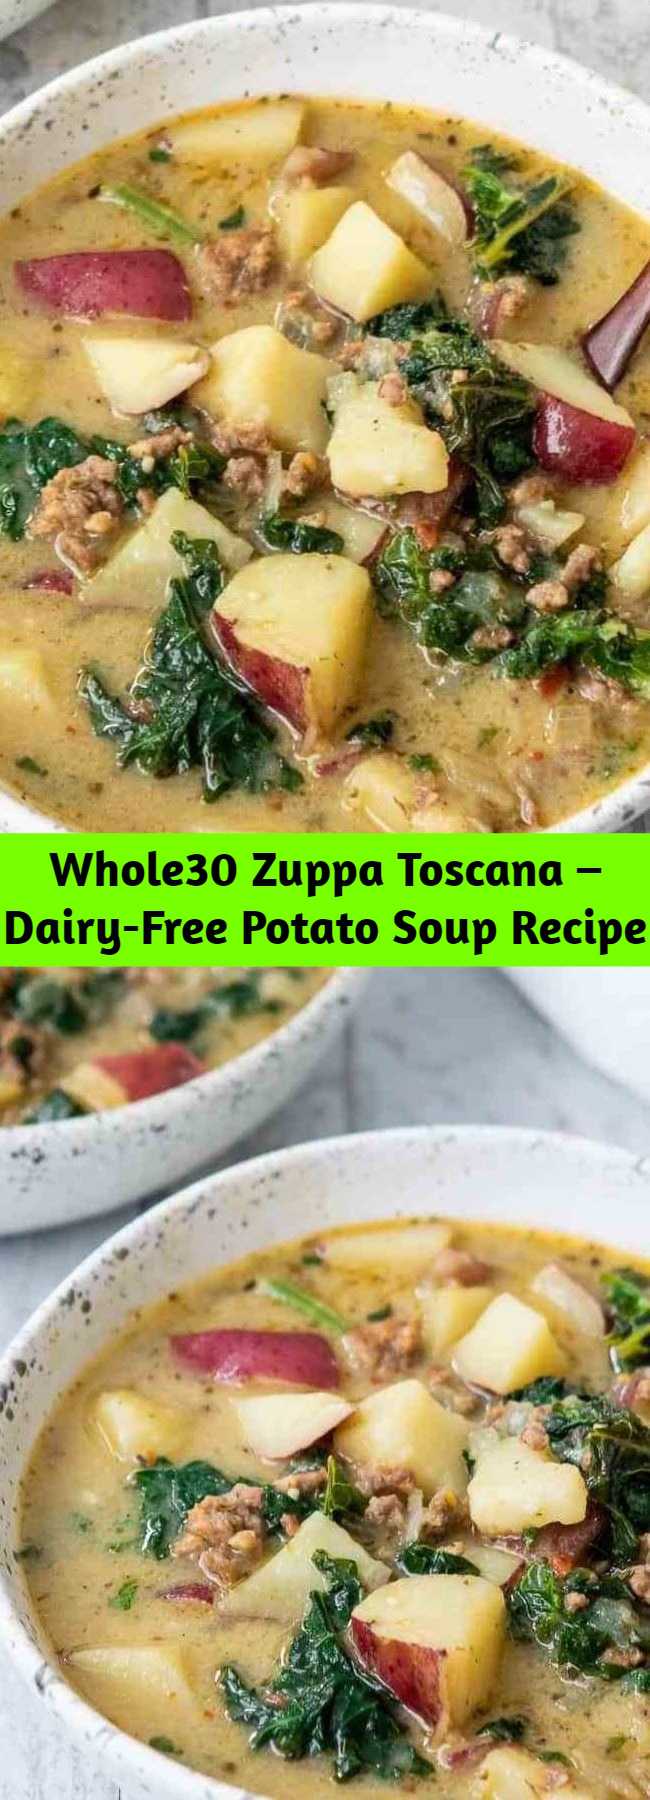 Whole30 Zuppa Toscana – Dairy-Free Potato Soup Recipe - Cozy up to this Whole30 Zuppa Toscana tonight! Packed with potatoes, sausage and fresh crunchy kale swimming in a lightly spiced broth, you’ll think you’re at Olive Garden (minus the guilt)! You’ll fall in love with this healthy, dairy-free, gluten-free Olive Garden Zuppa Toscana copycat recipe once you give it a try.